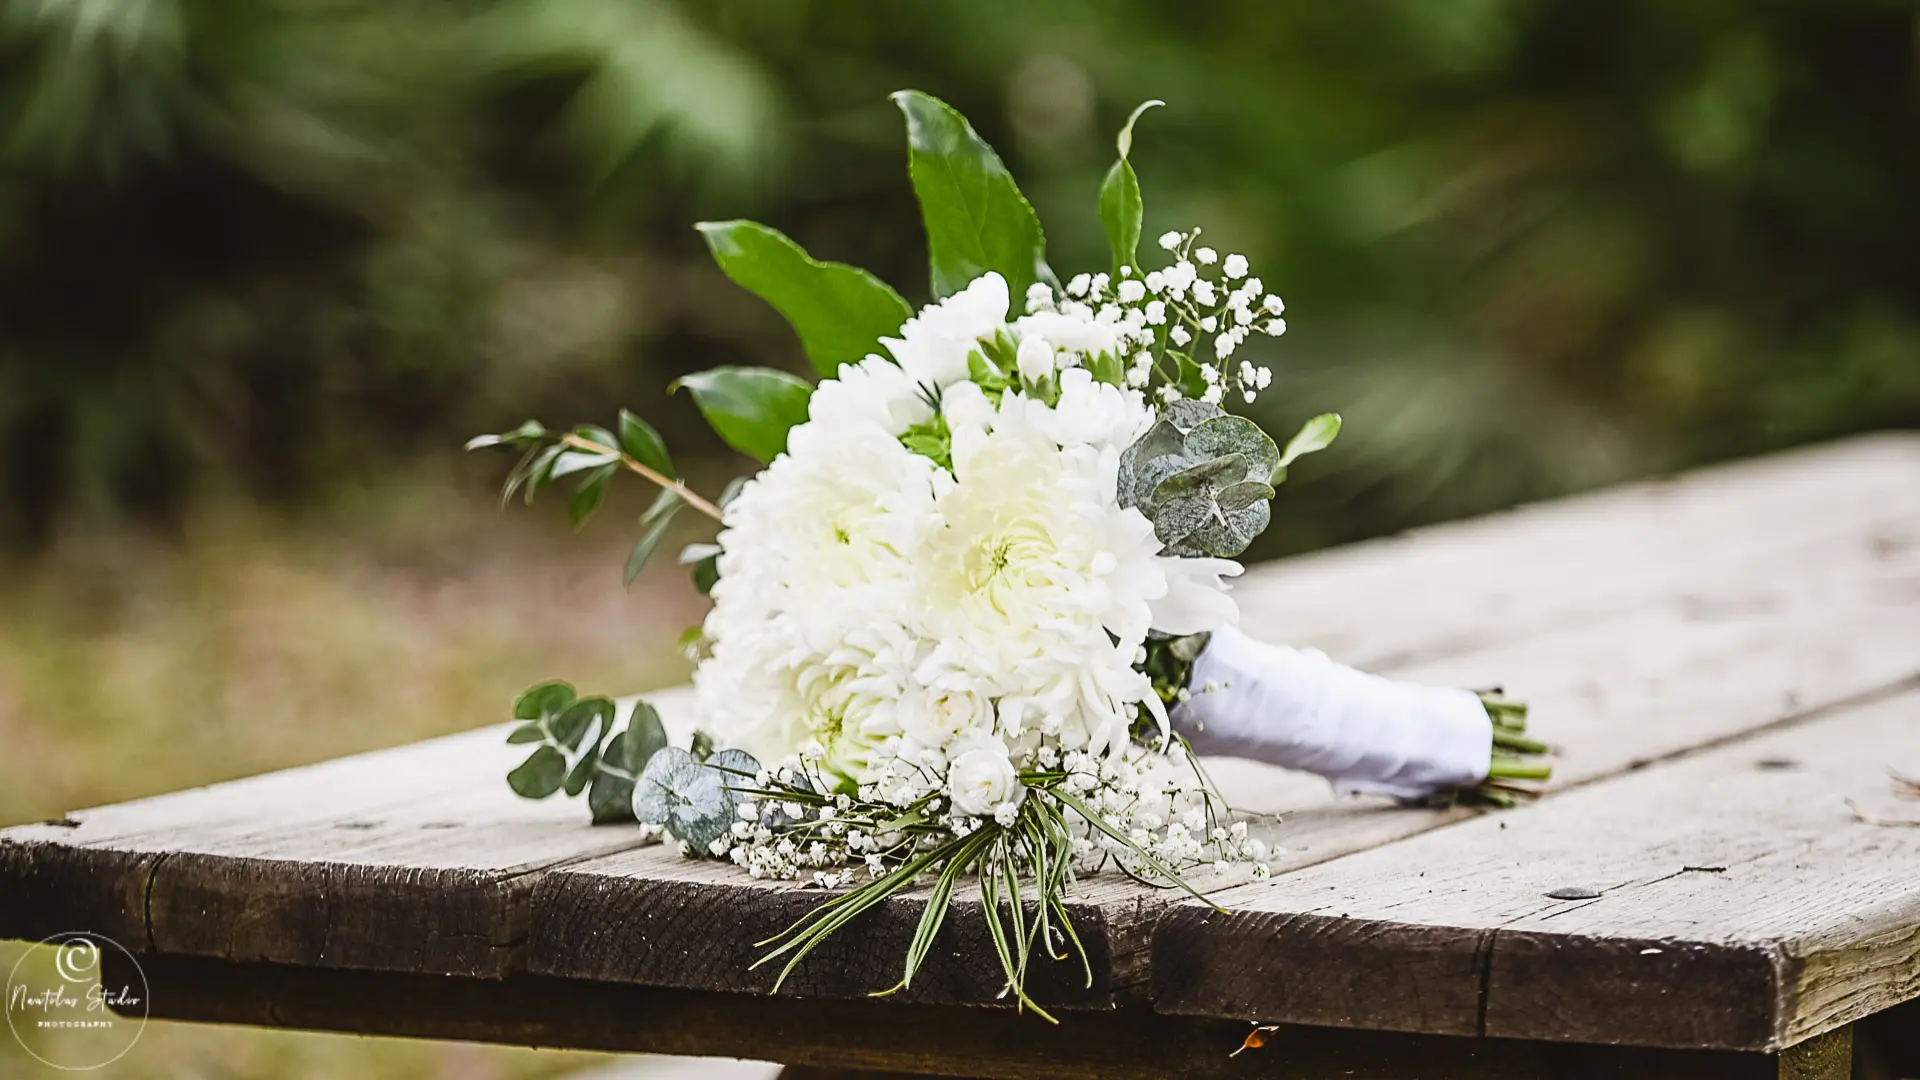 Photo showing a bridal bouquet with white Spider Mums